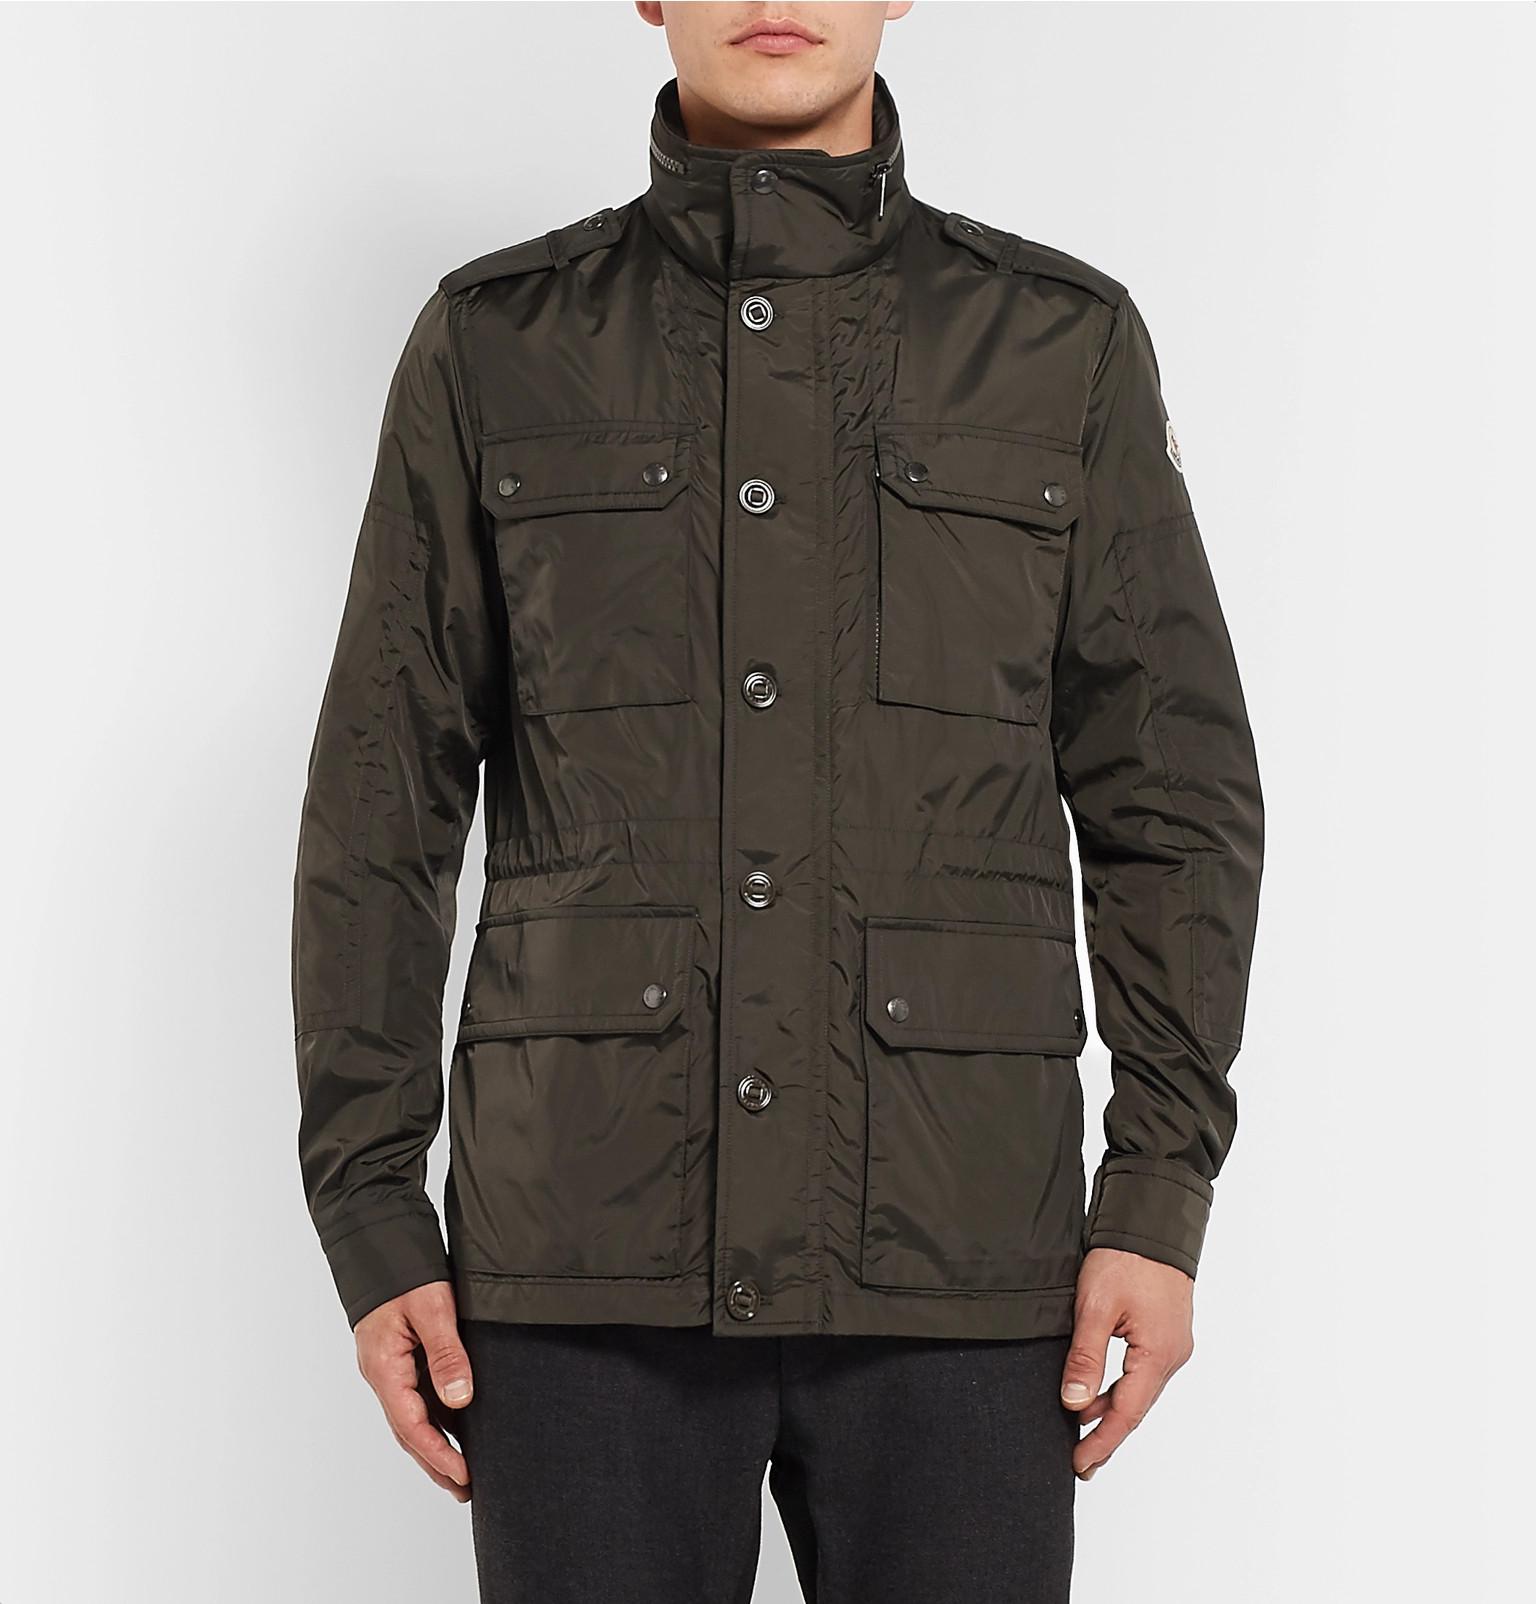 Moncler Synthetic Christian Shell Field Jacket in Green for Men - Lyst